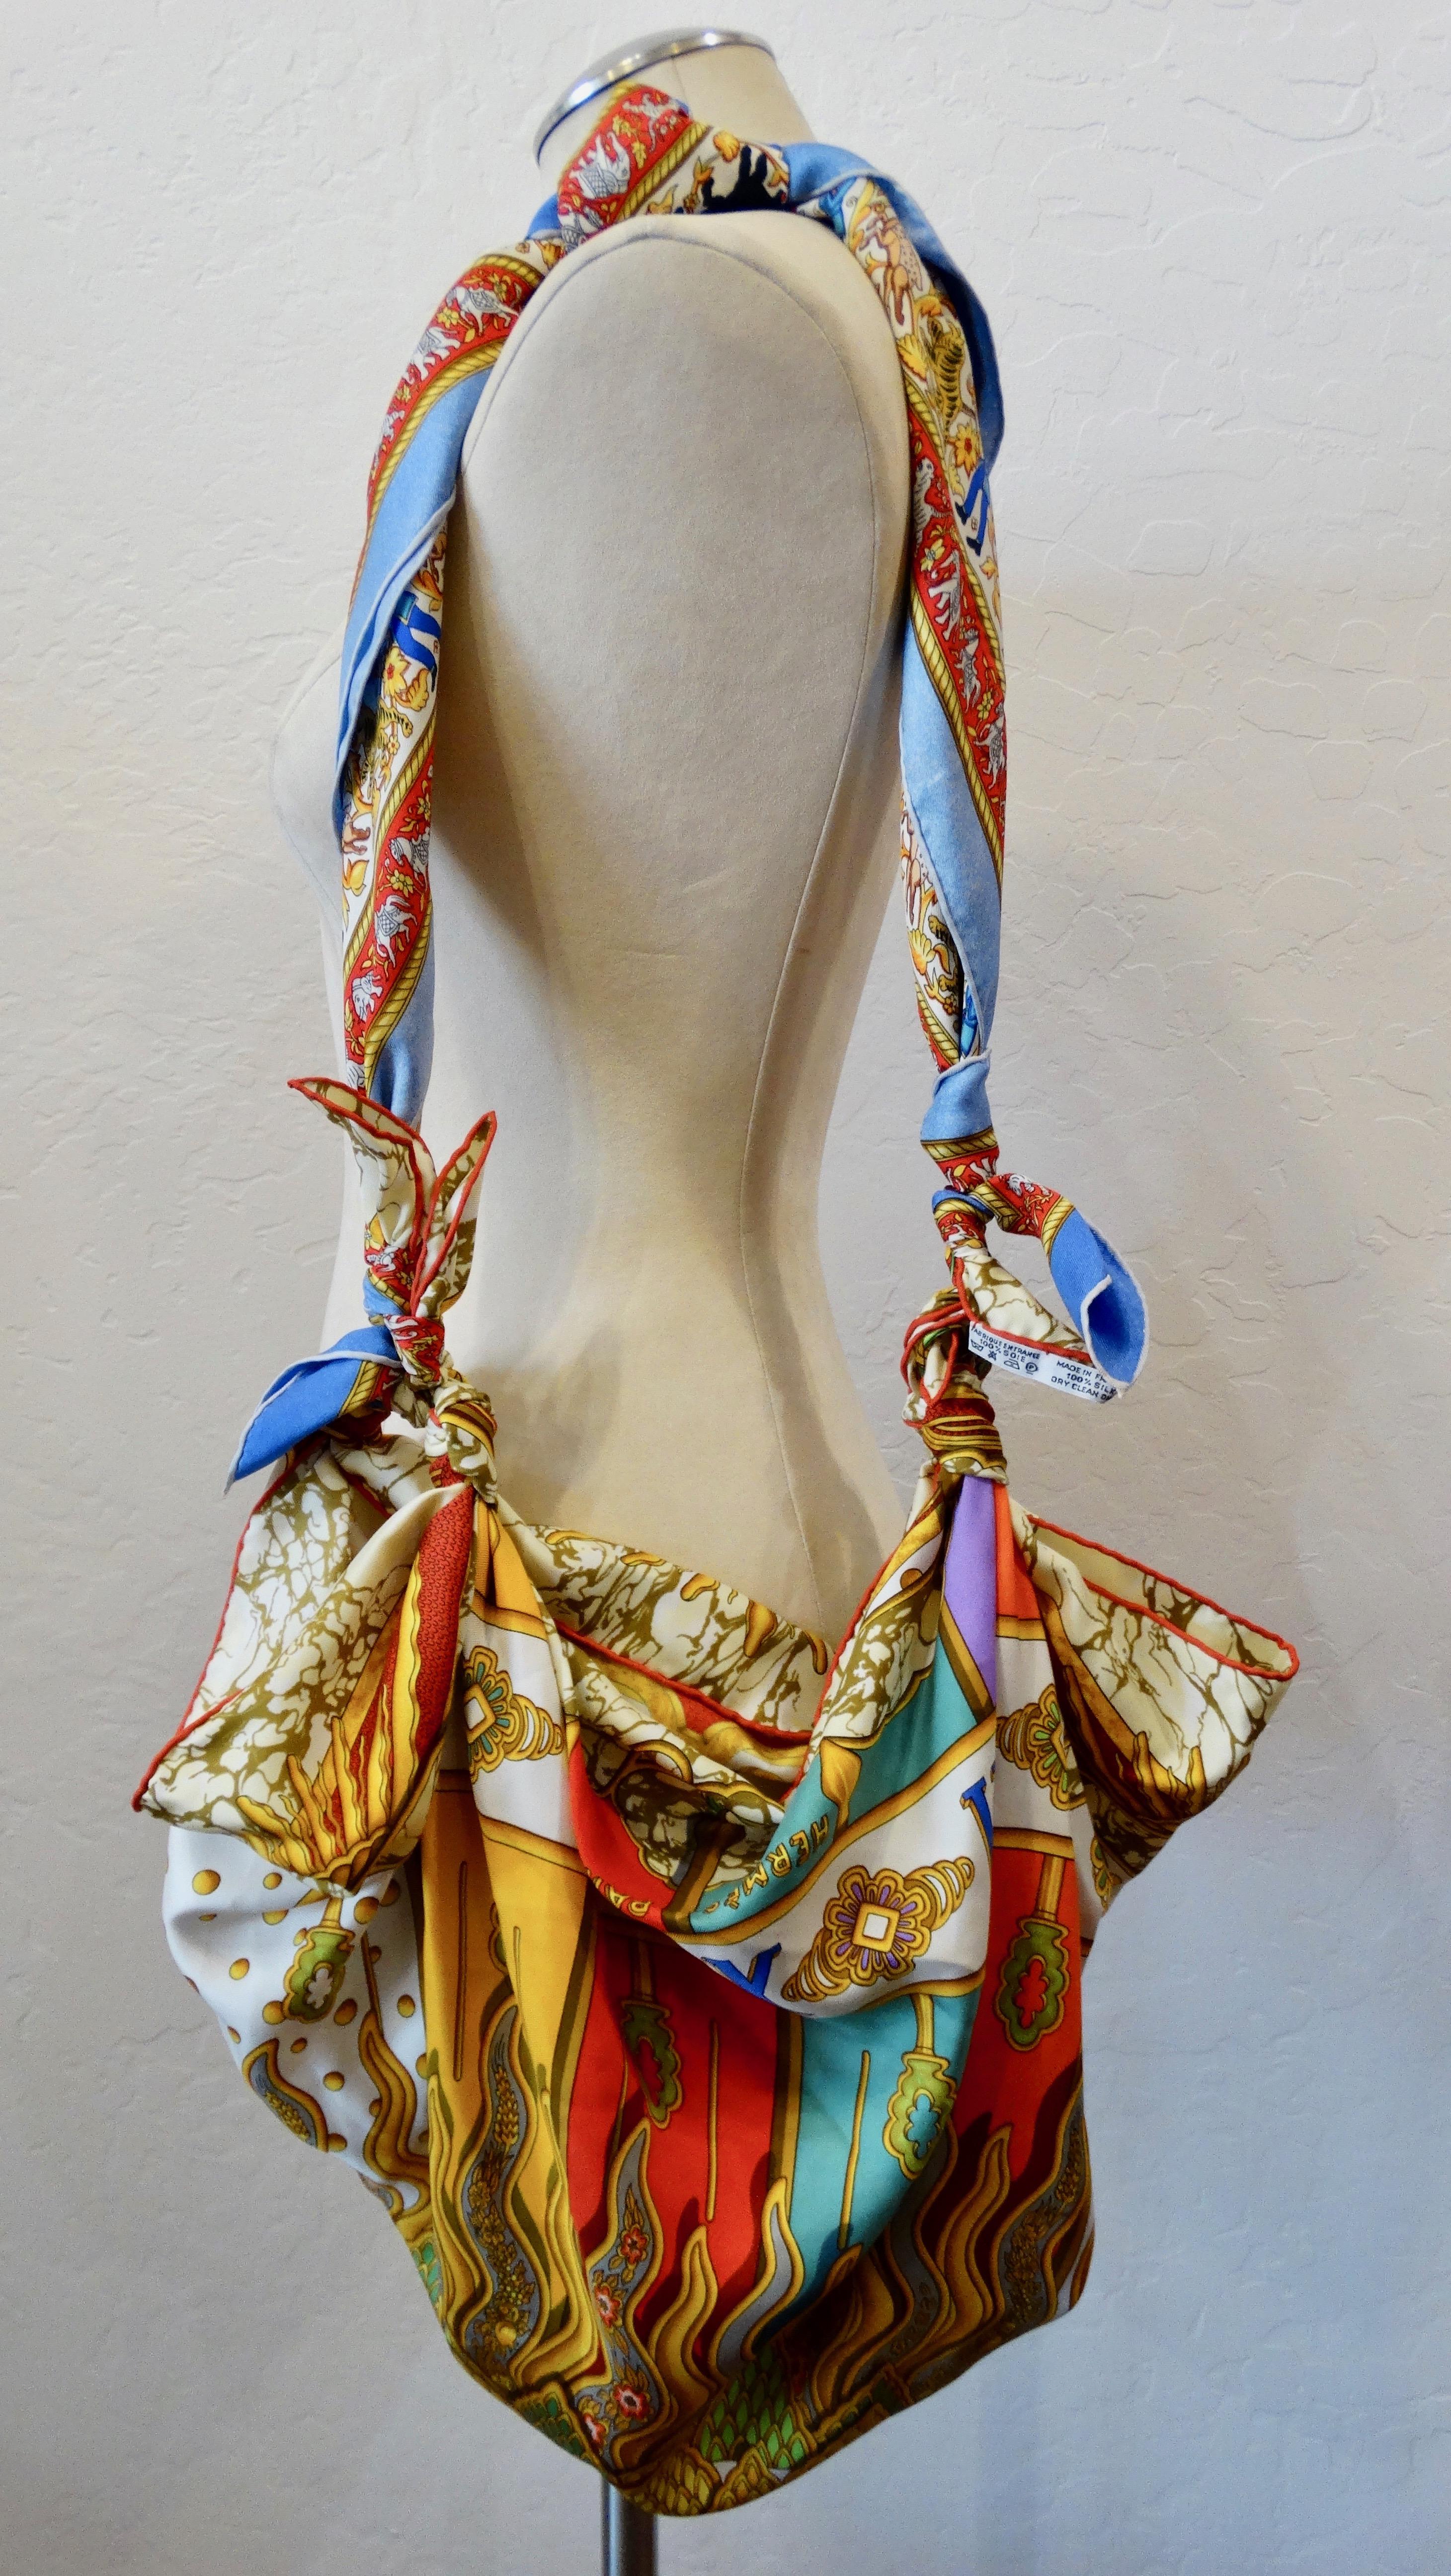 Hello Hermes! Elevate your whole entire bag collection with this amazing Hermes scarf bag! Featured as the bag is the beautiful 1994 Carpe Diem scarf designed by Joachim Metz. Includes a vibrant array of colors and a large mystic astrology sun. The